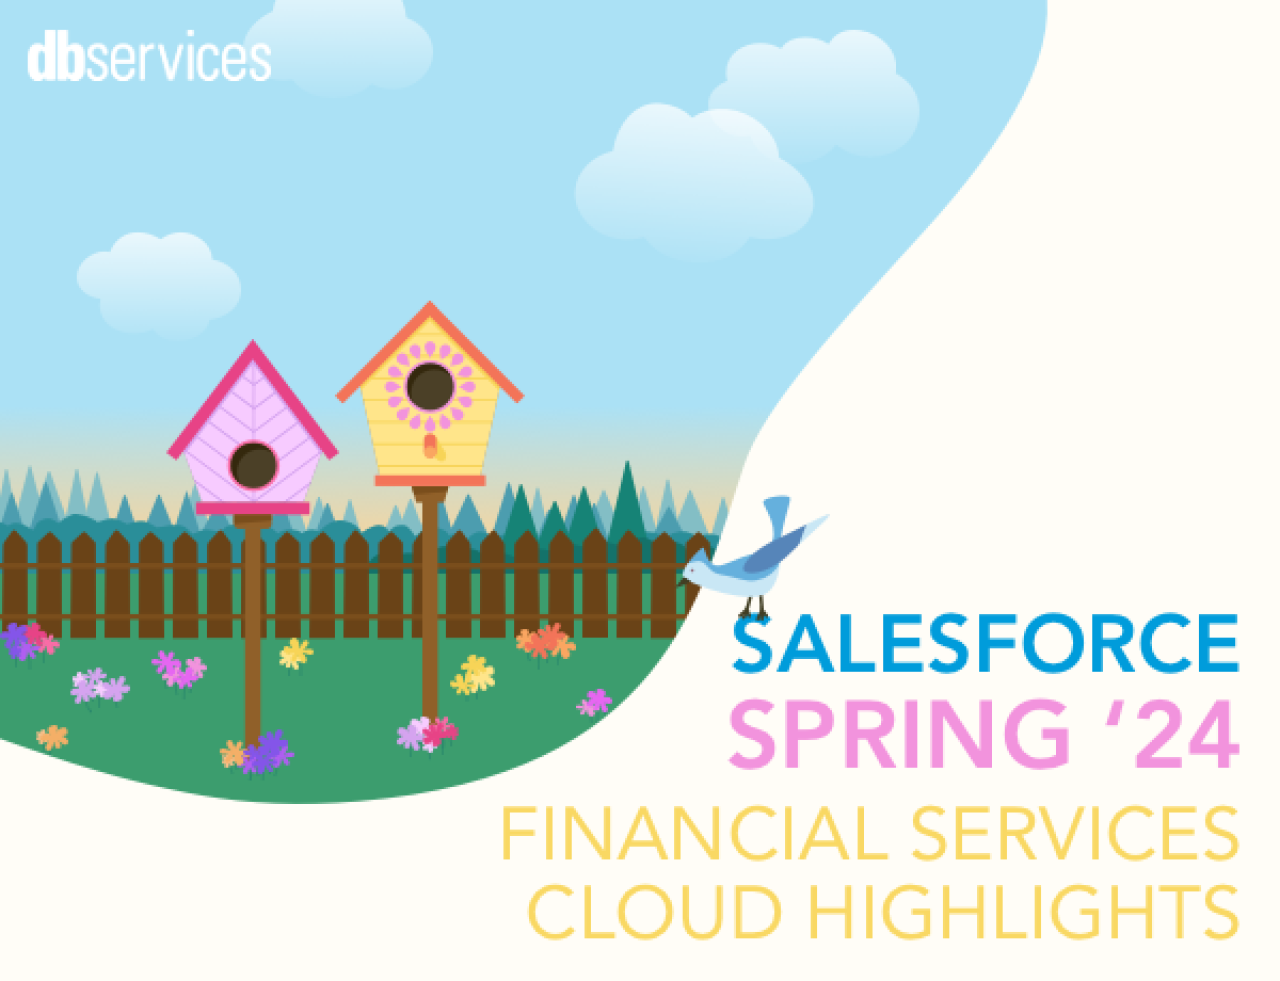 salesforce spring 24 financial services cloud highlights.